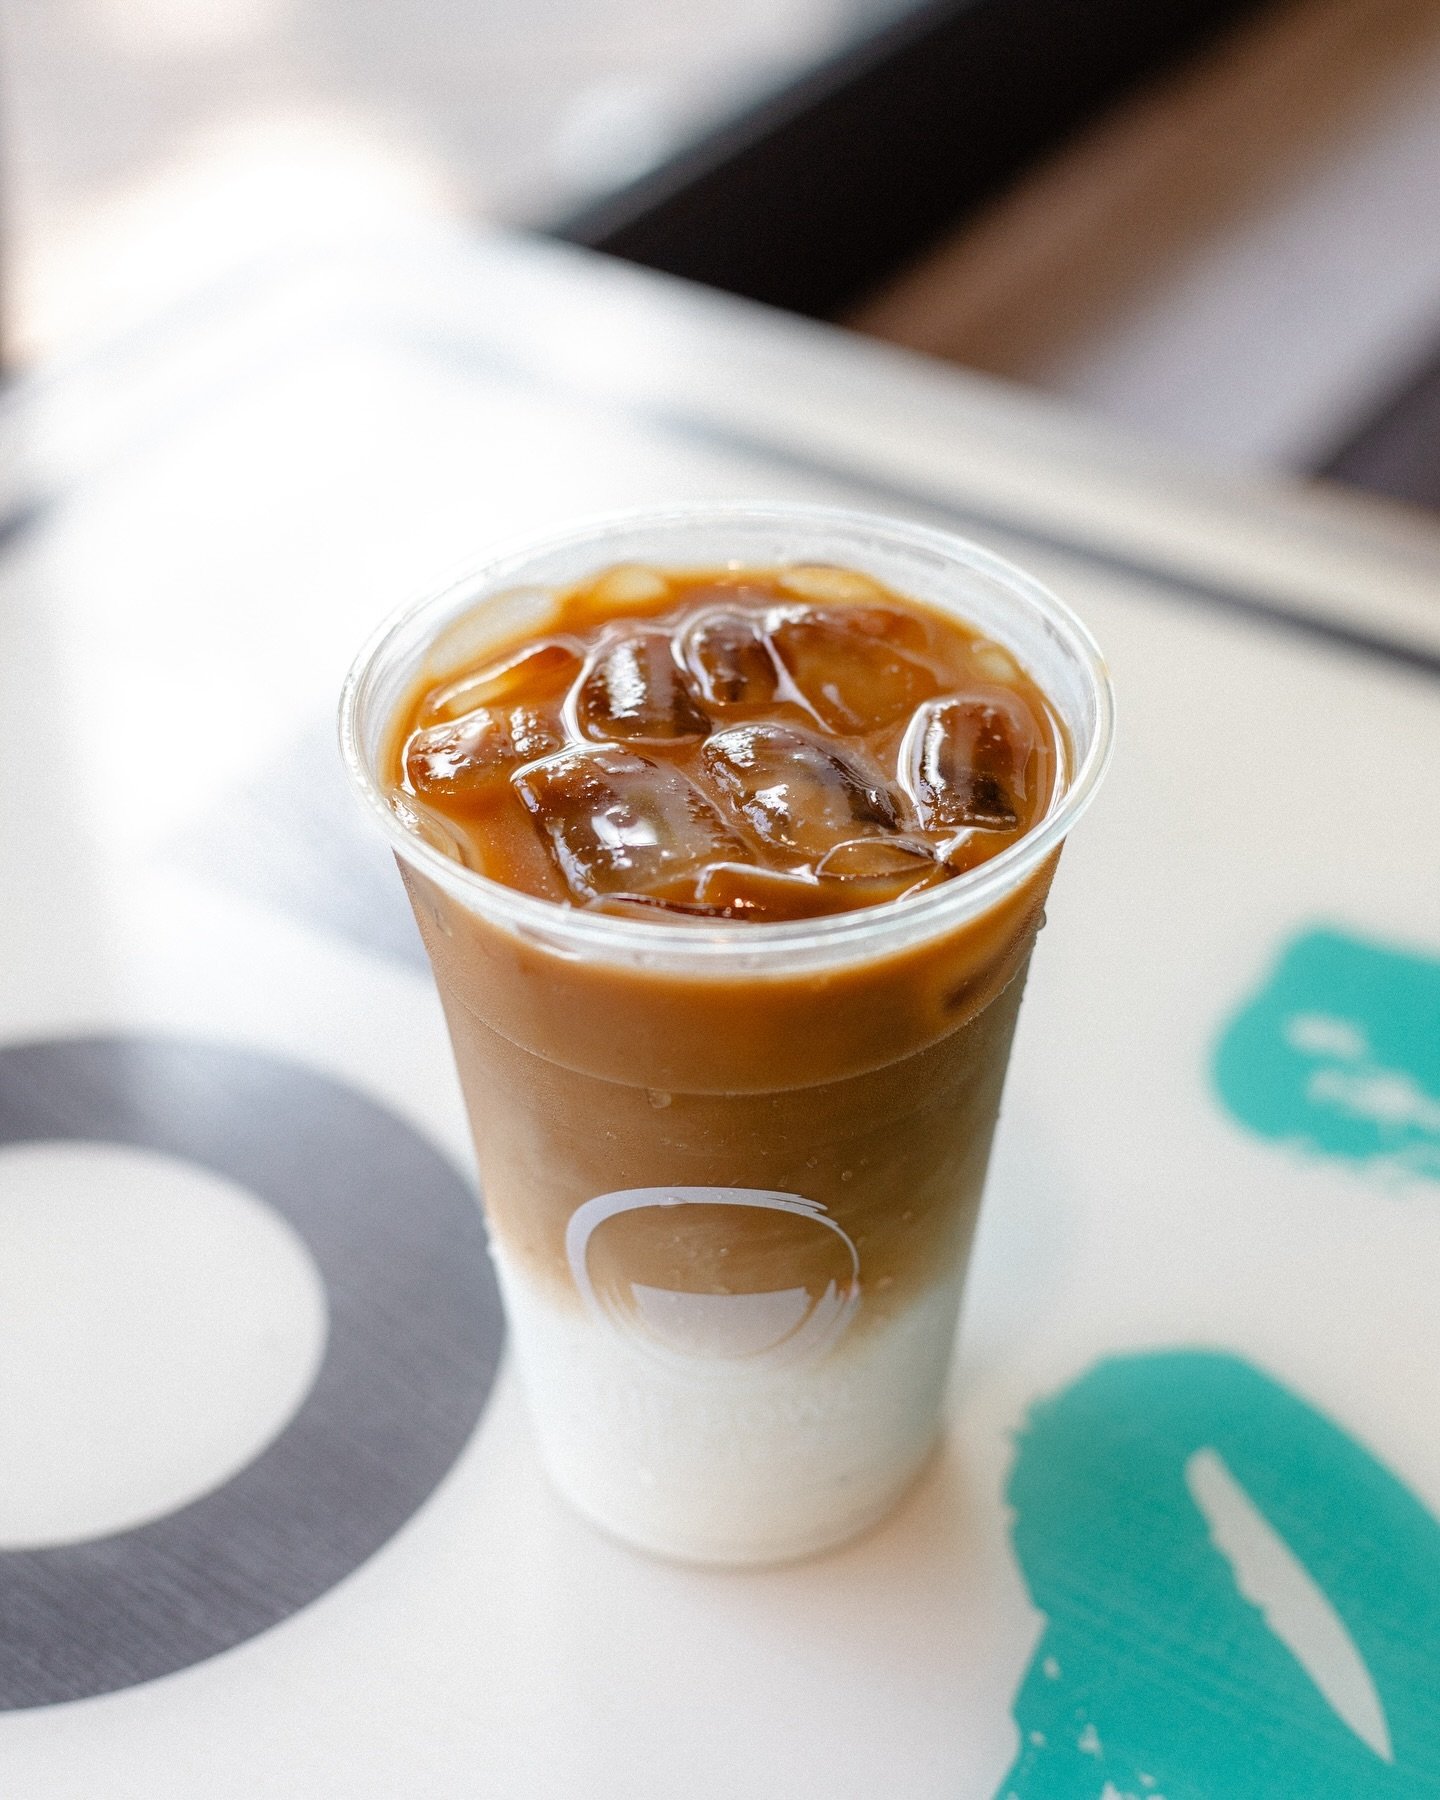 2pm on a Monday? Coffee, please!!! ☕️ And do you know where to get your organic latte fix? That&rsquo;s right. At our Central Ave location right here in Naples! 

Are you an iced latte or hot latte kinda person??